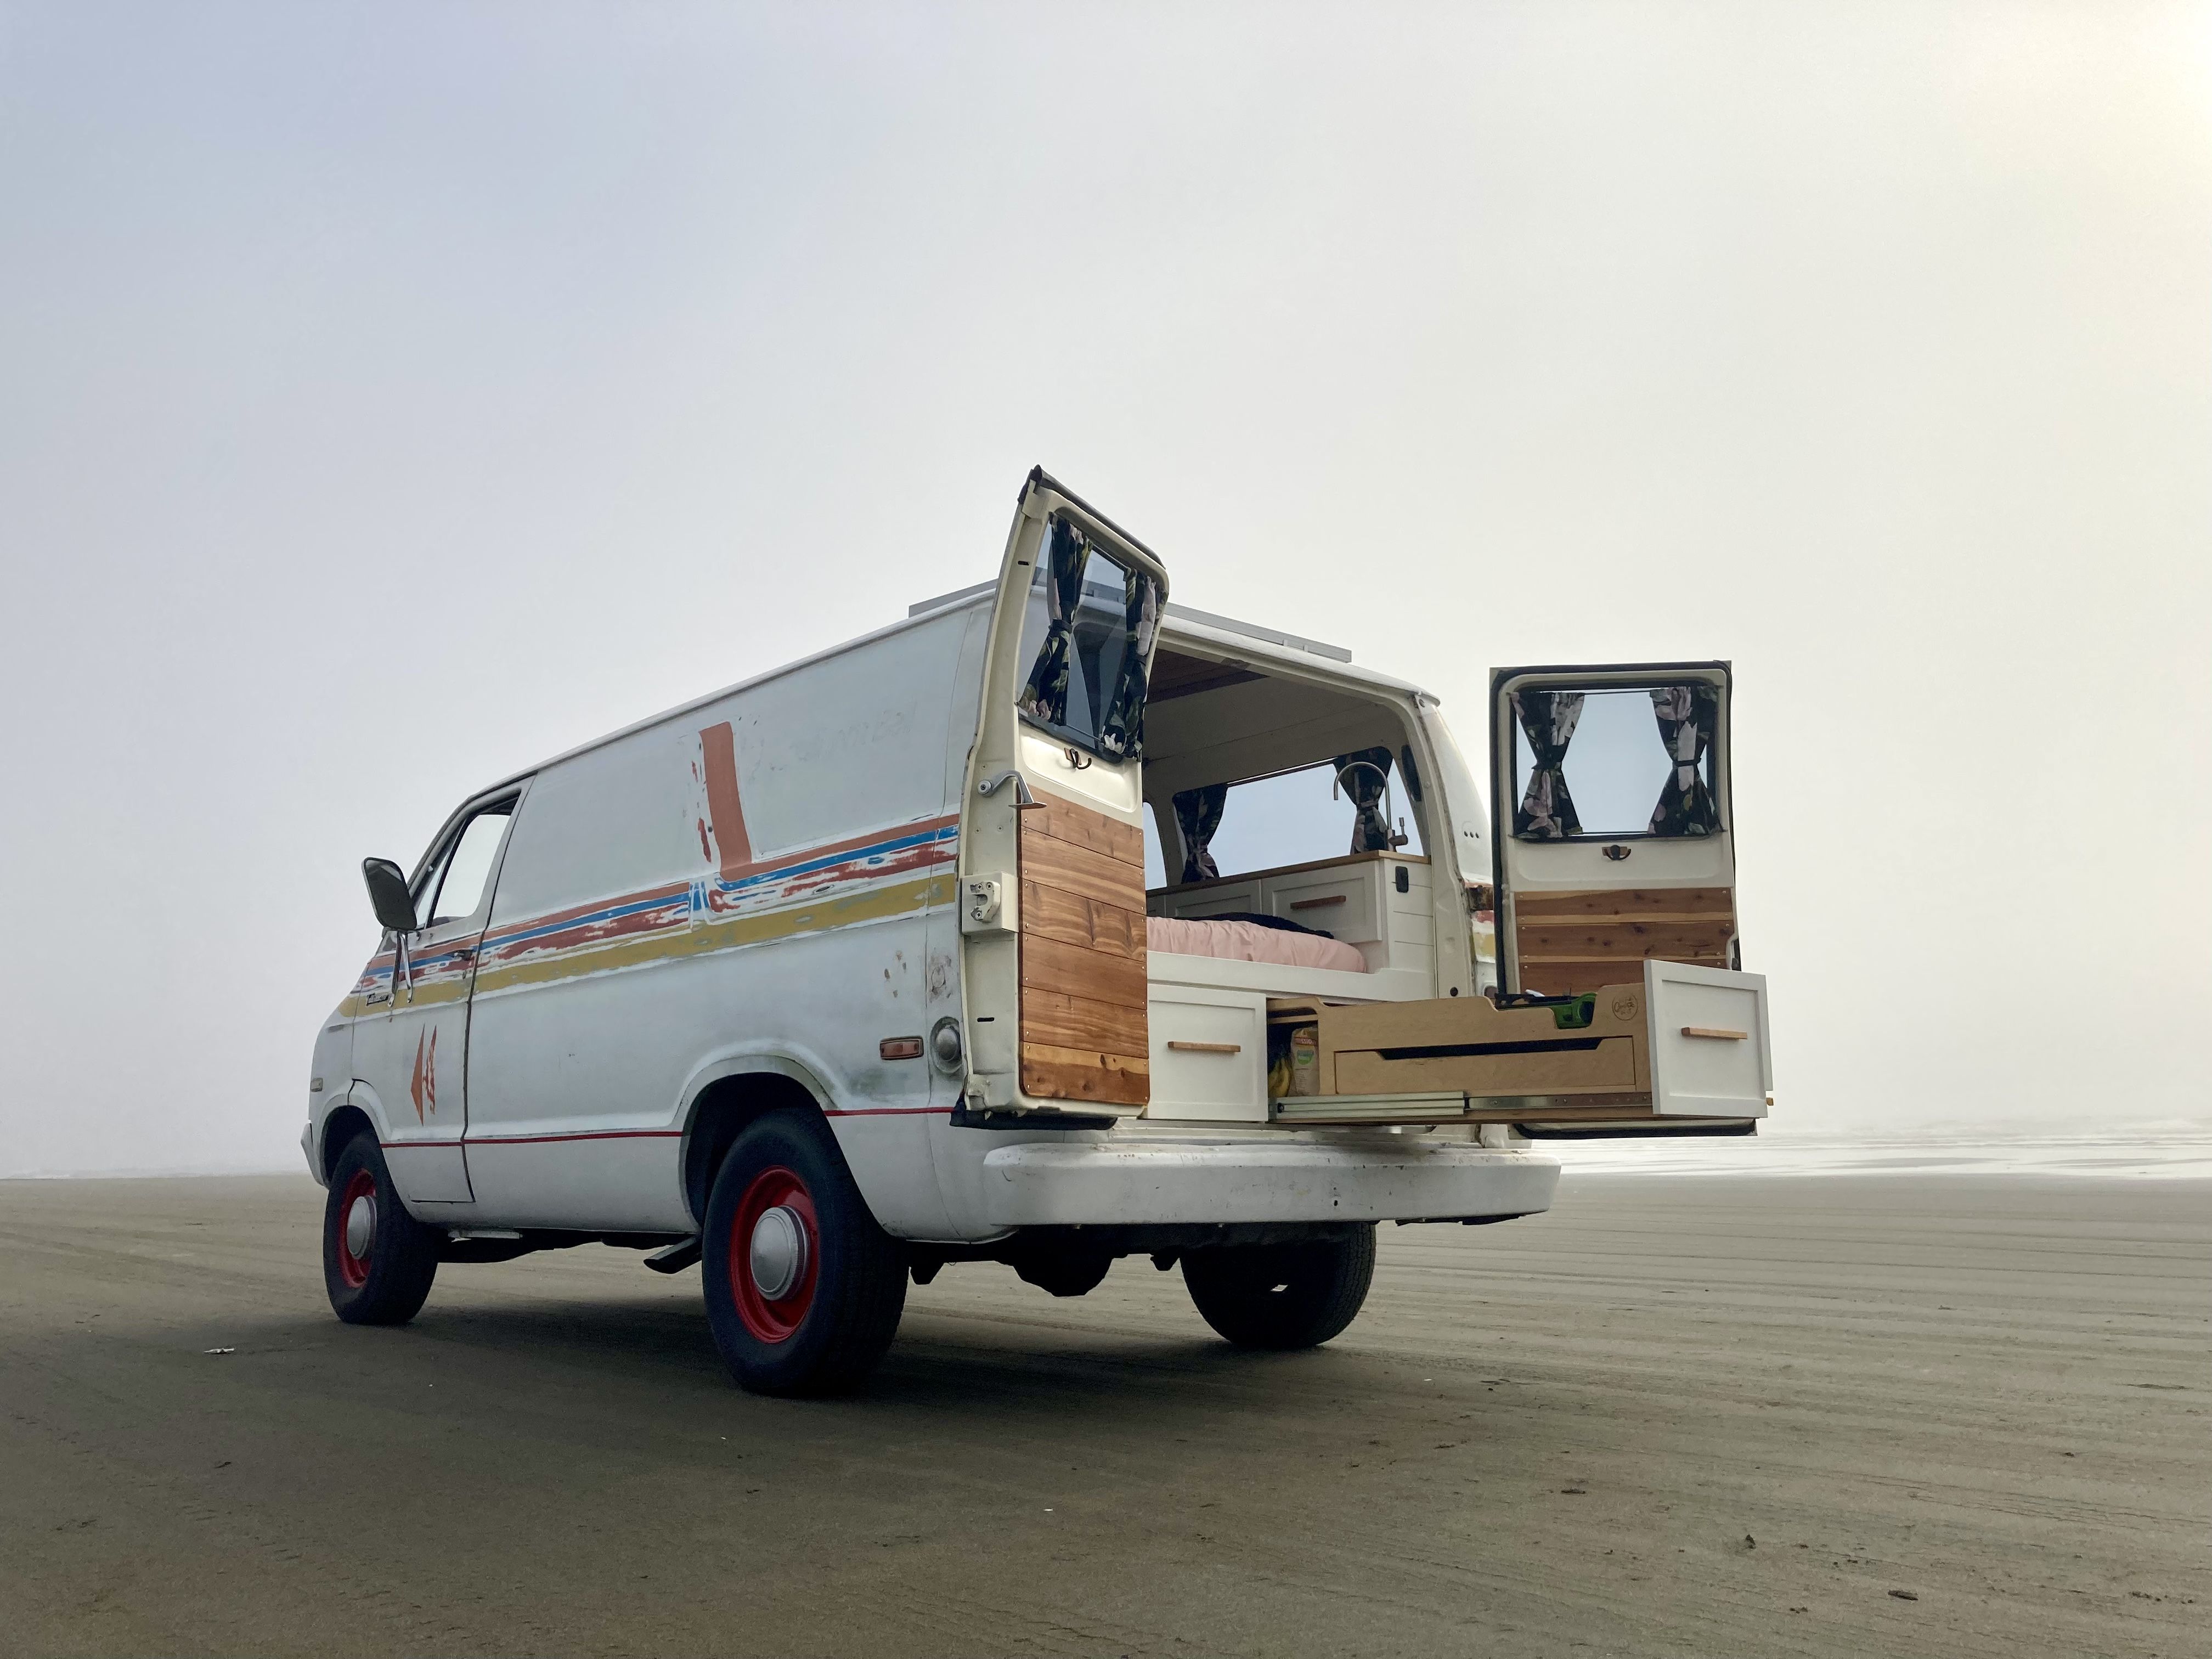 5 Epic Small Campervan Conversions To Inspire Your Next Build